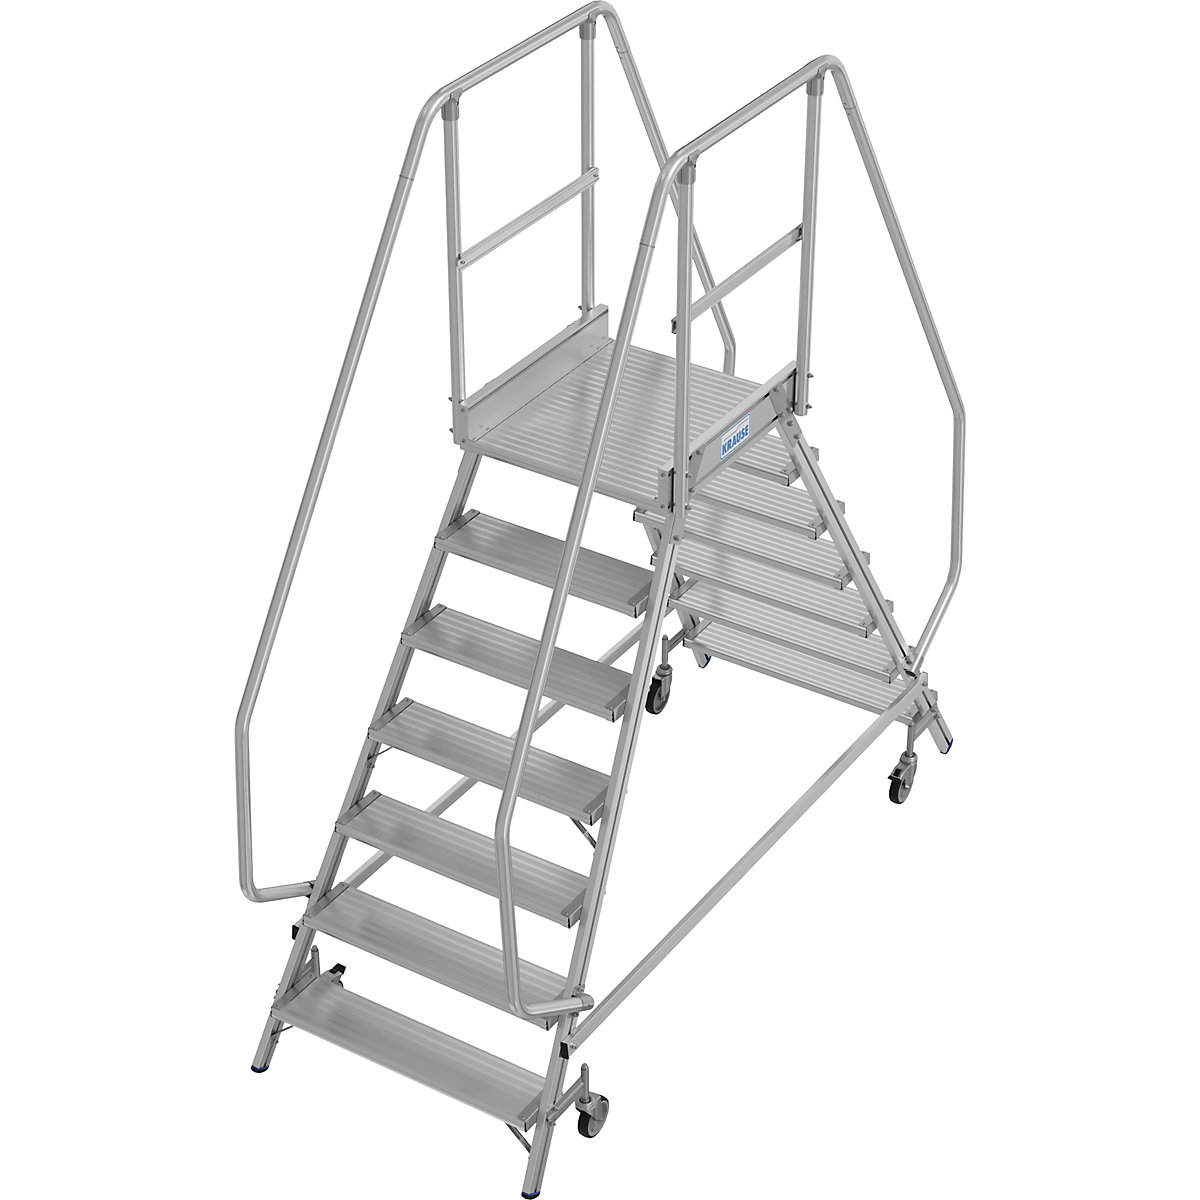 Mobile safety steps – KRAUSE, double sided access, 2 x 7 steps-12